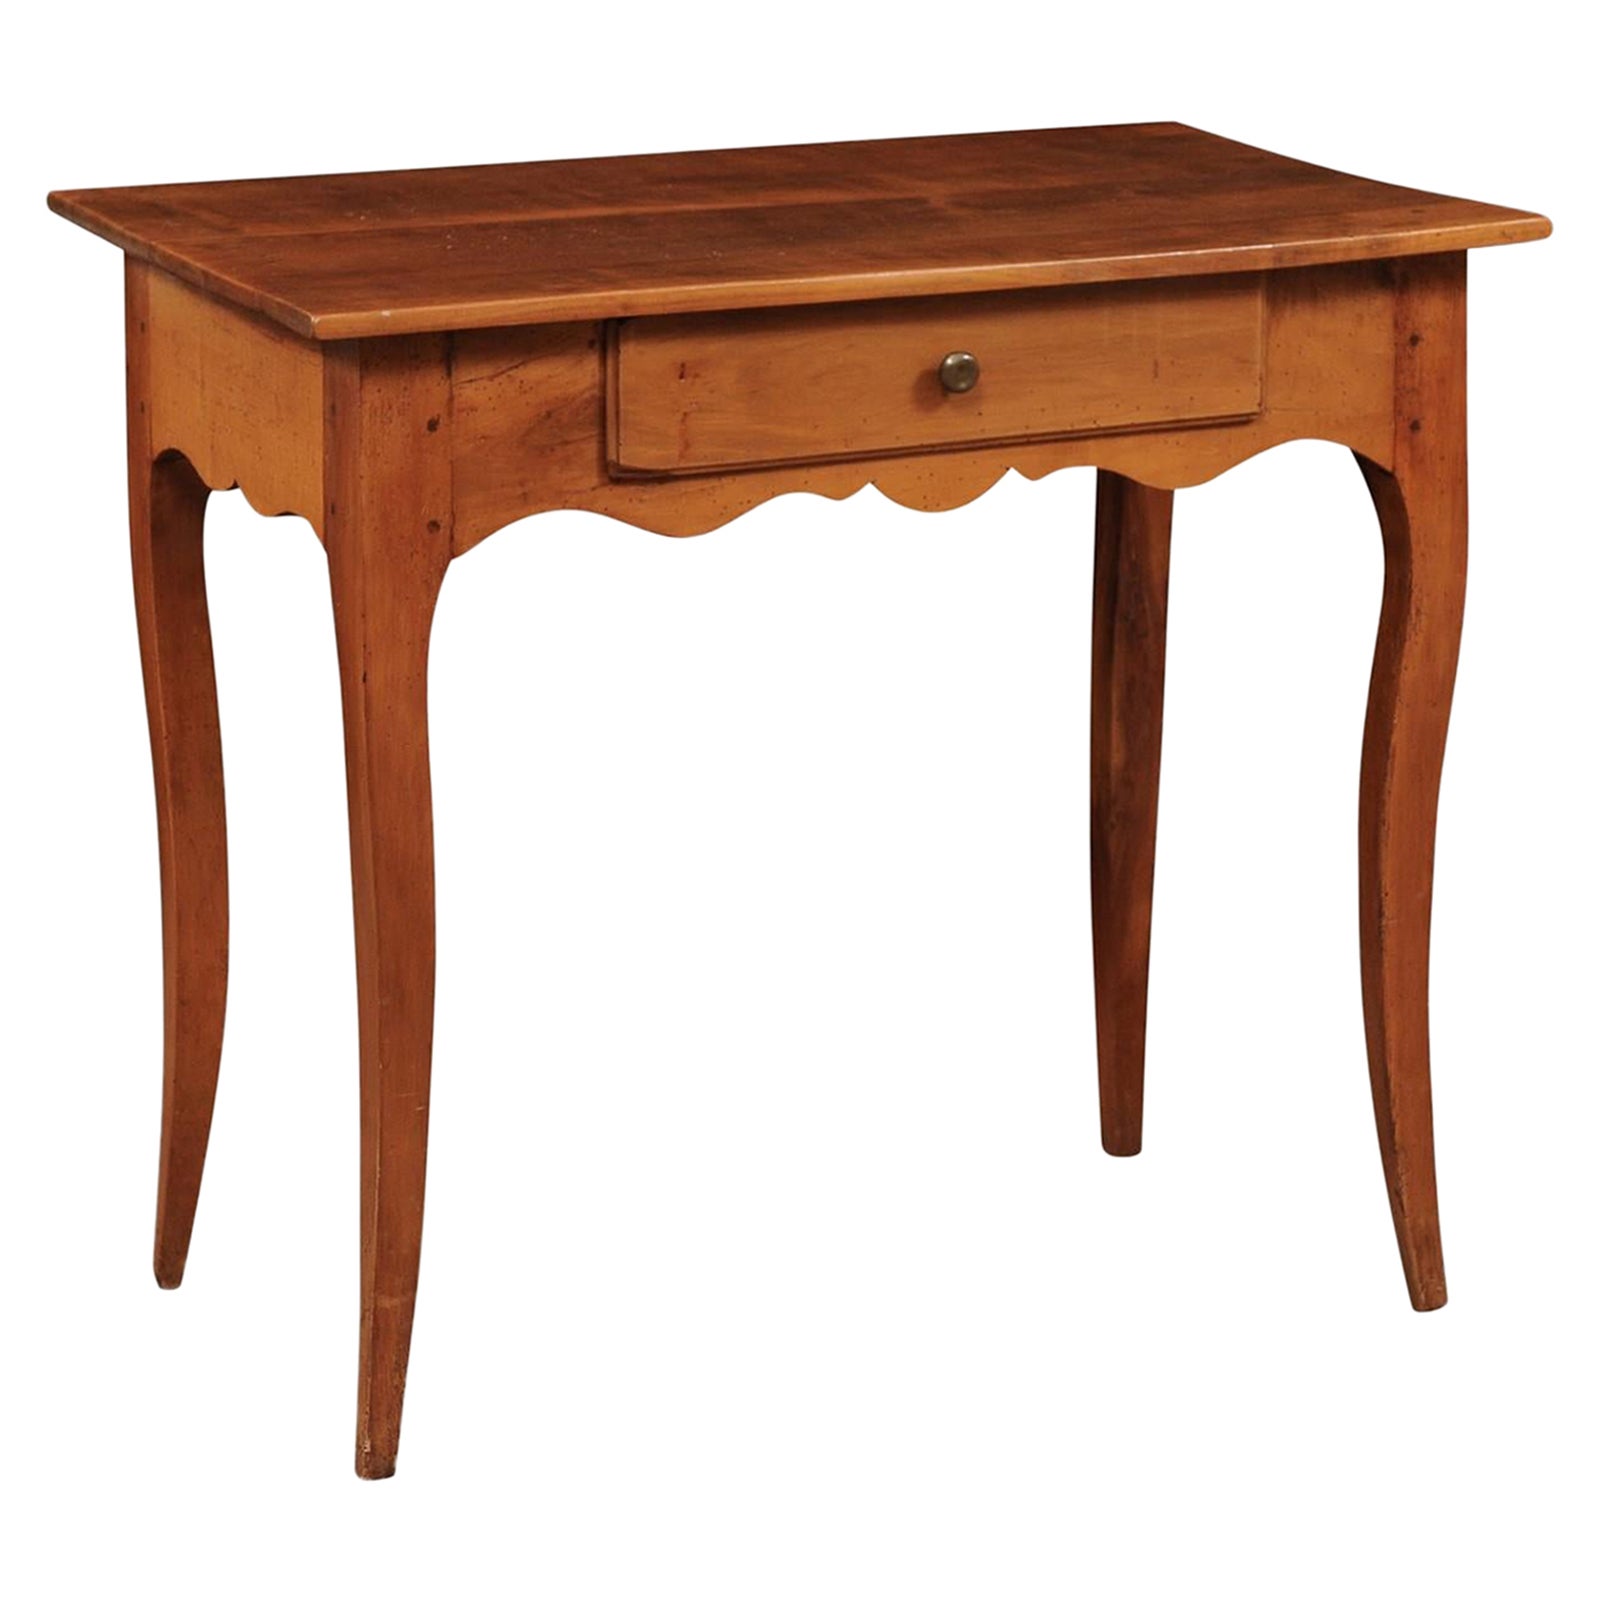 Louis XV Style Fruitwood Side Table with Drawer, 19th Century France For Sale